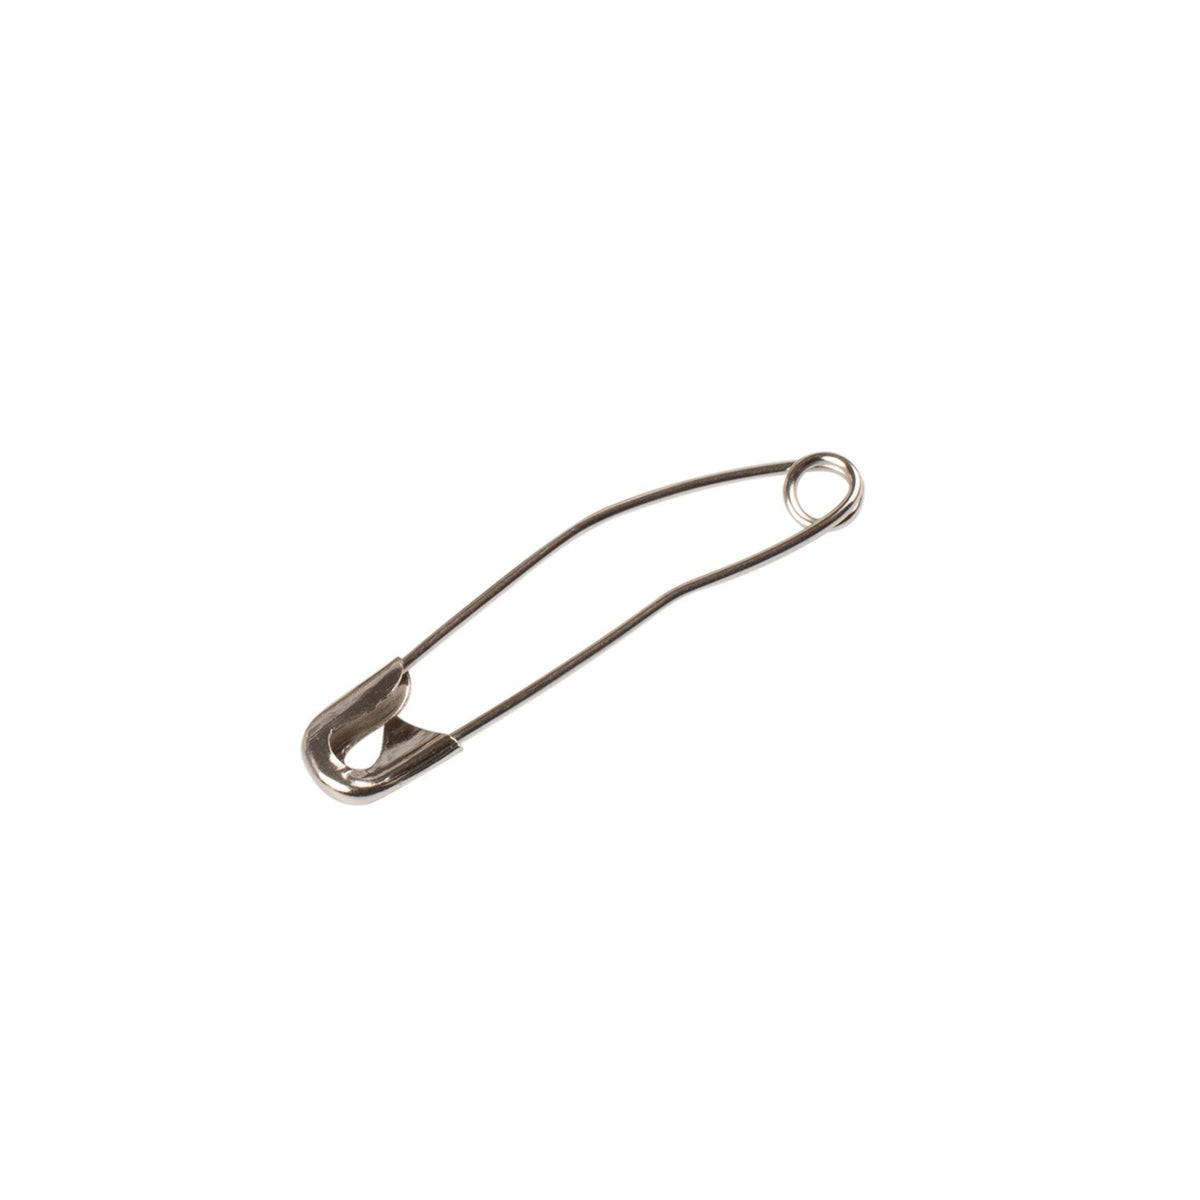 Hello Hobby Assorted Curved Safety Pins, Sizes 1, 2, and 3, 150 Count 